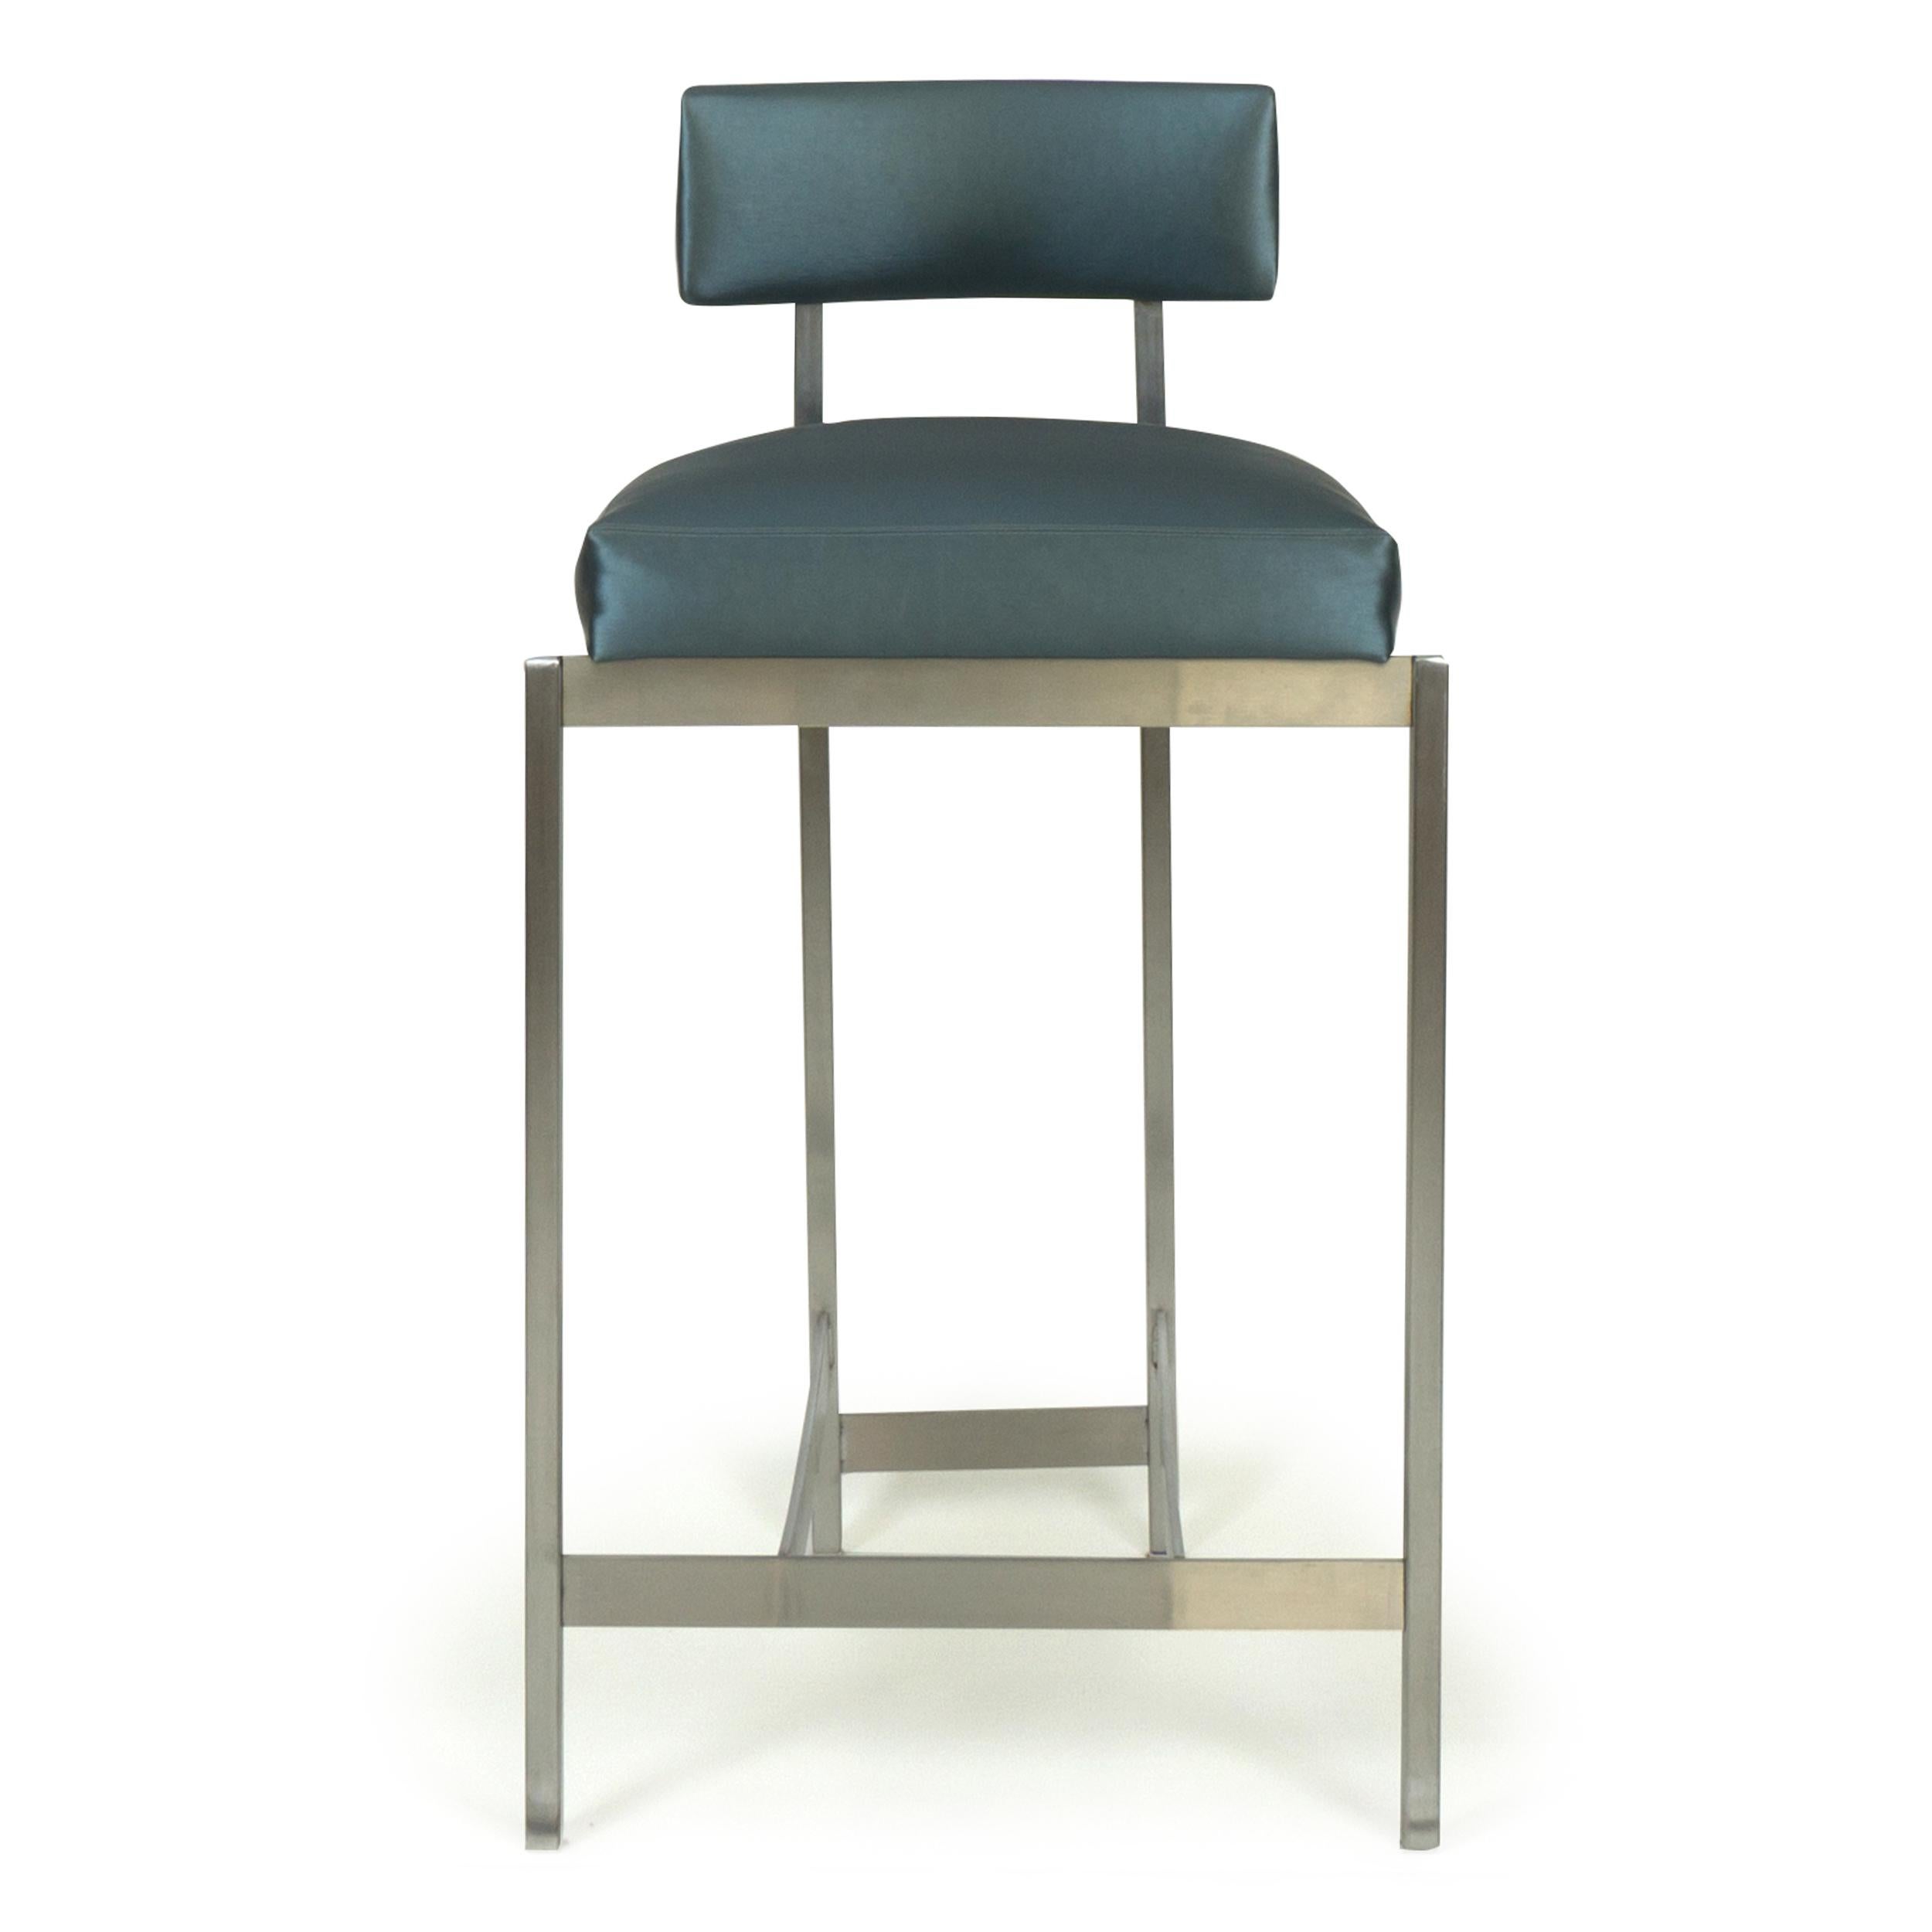 Inspired by Italian design, this stool can be made for bar or counter height. Stretched, elongated lines of the brushed stainless steel base are juxtaposed against a broad, squat seat and back covered in a durable Romo gray metallic vinyl. Seat